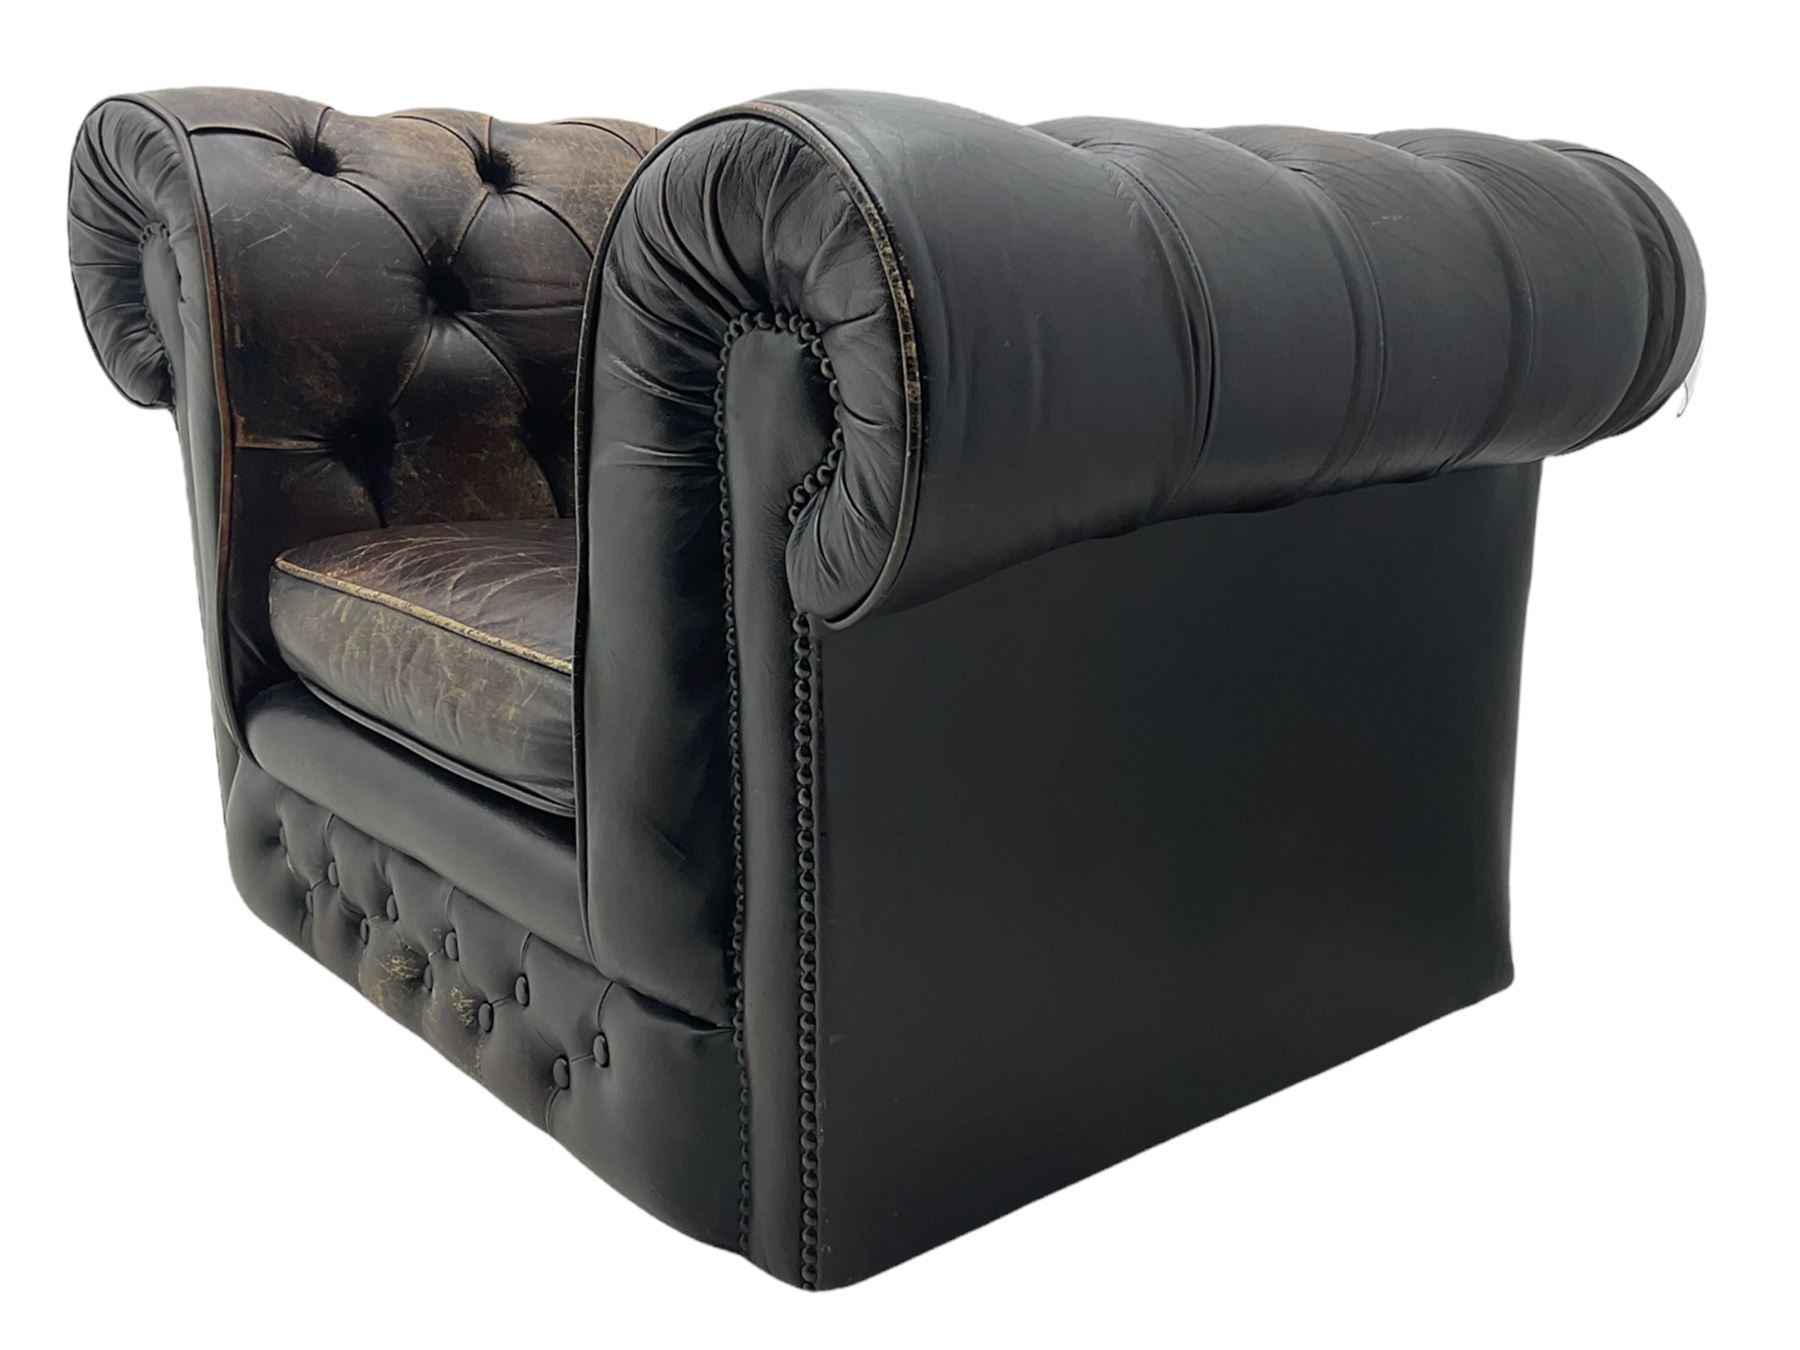 Chesterfield armchair - Image 4 of 6